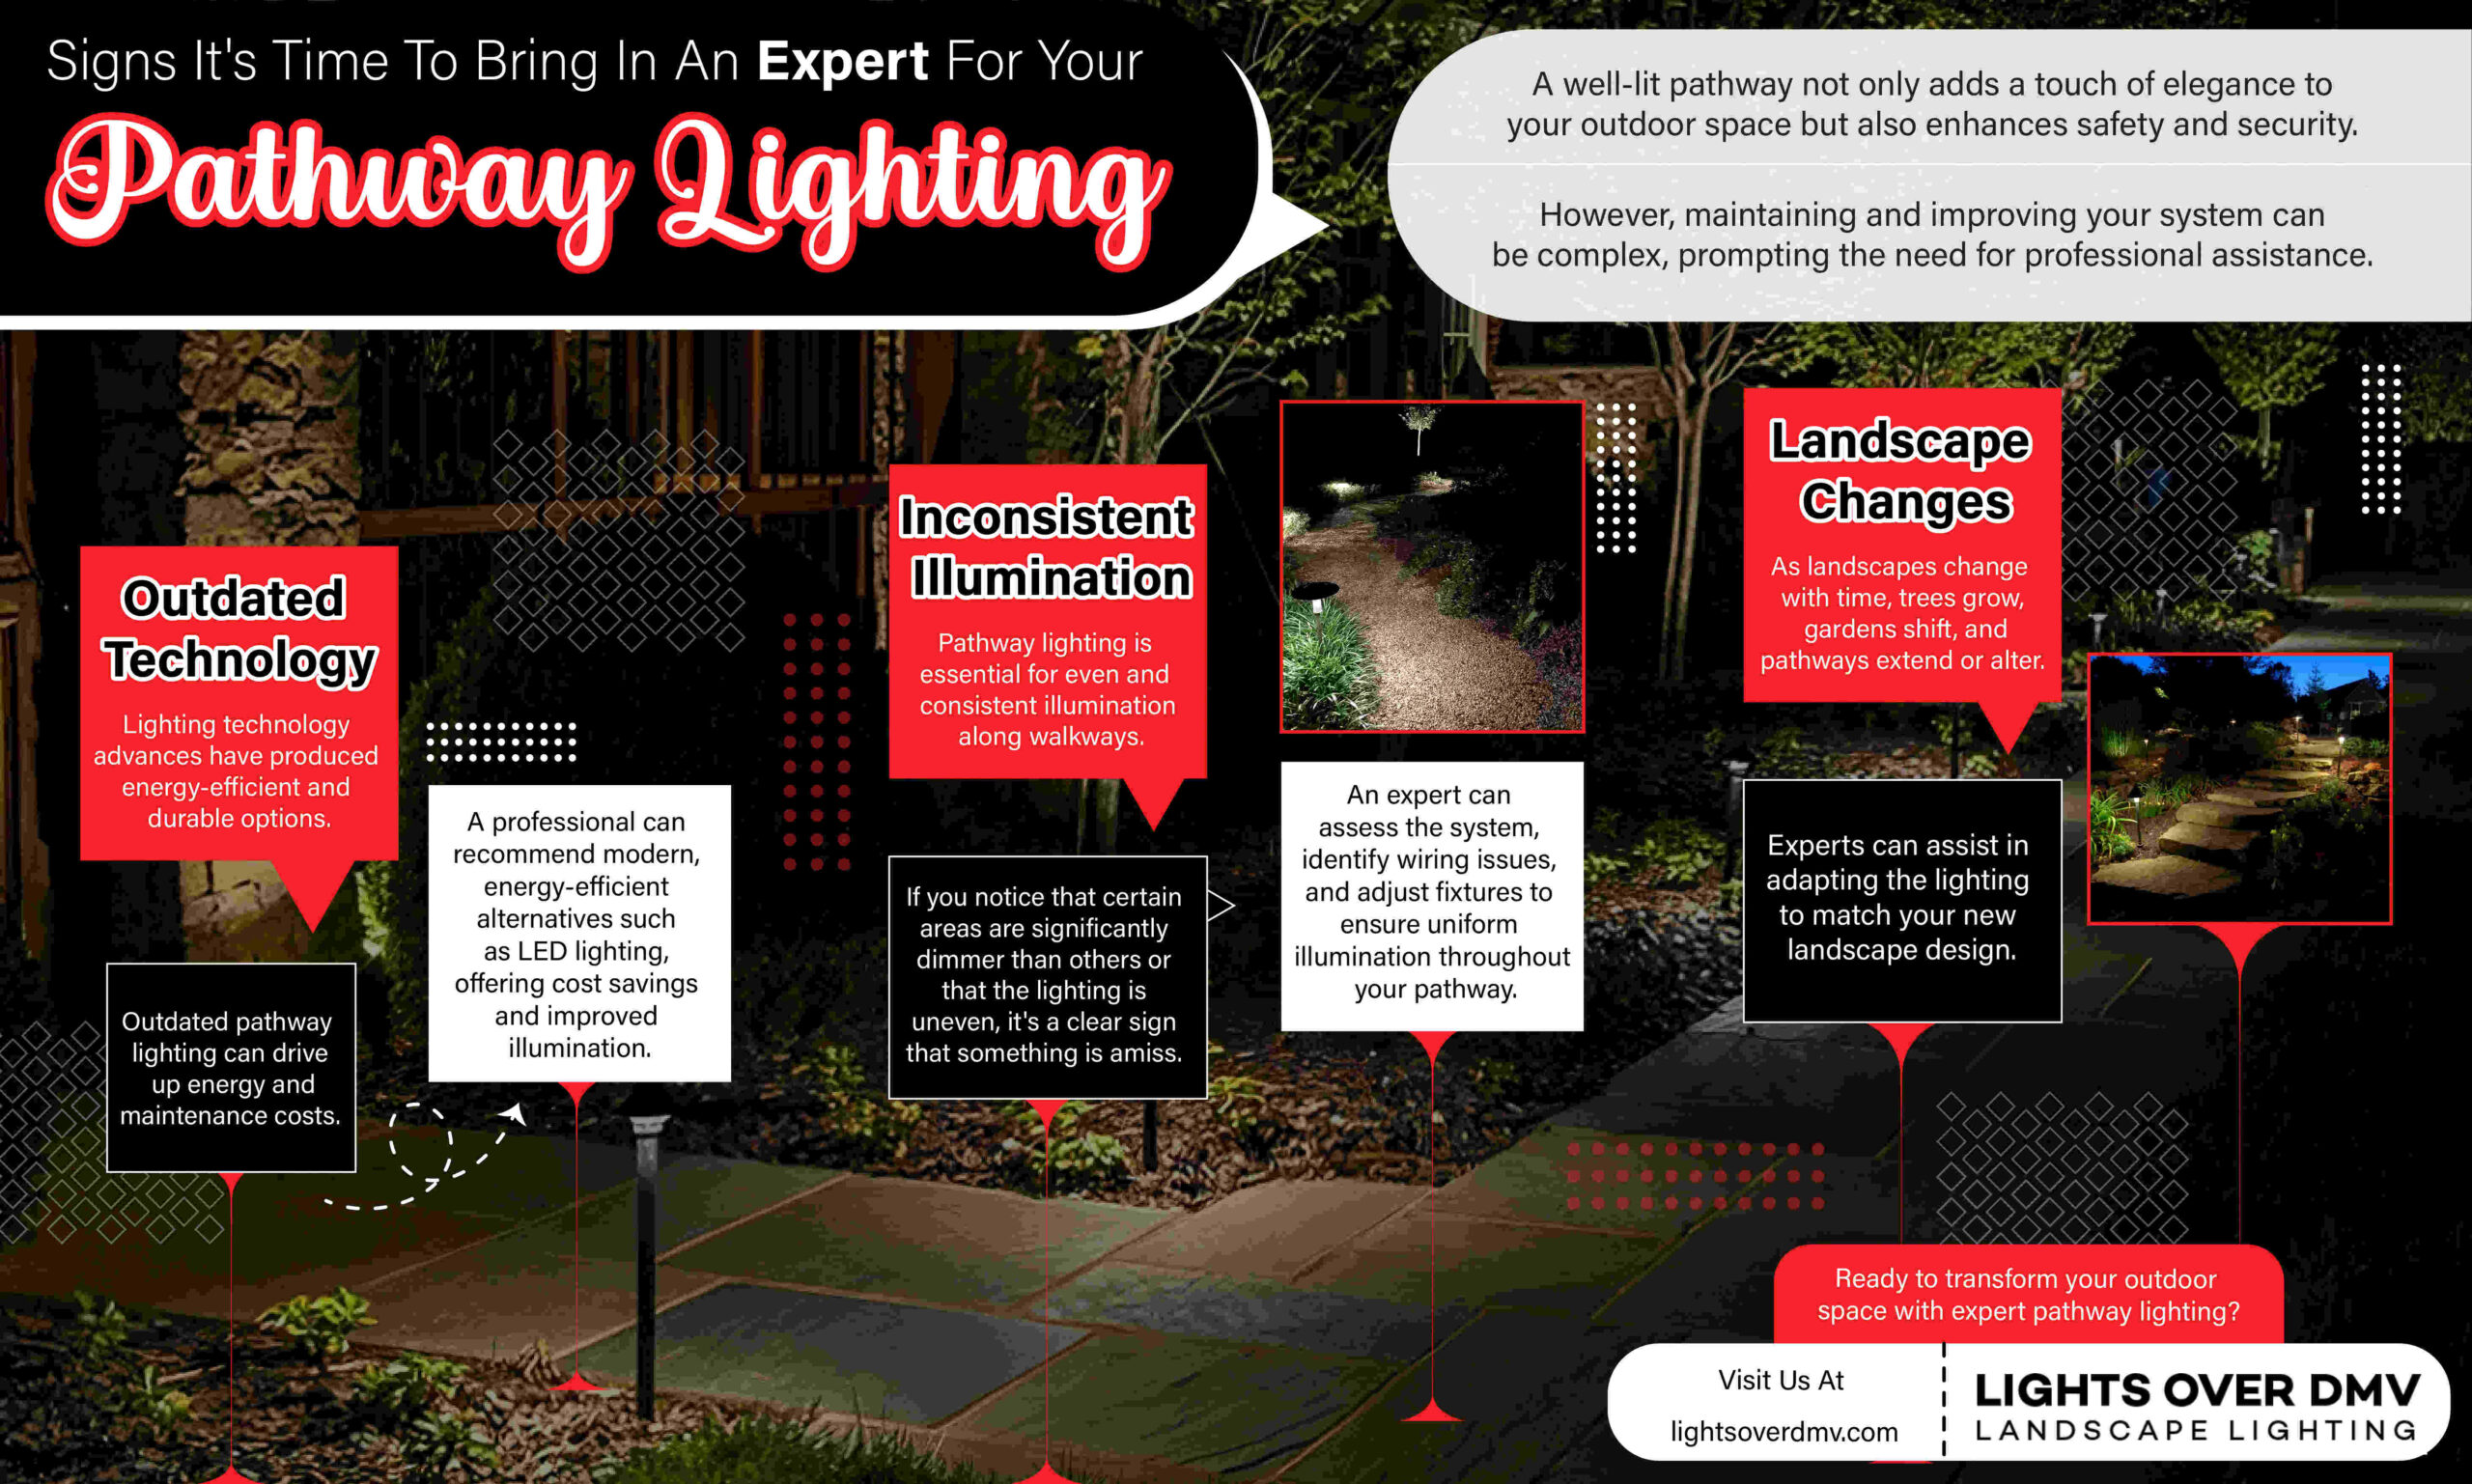 Signs It's Time To Bring In An Expert For Your Pathway Lighting